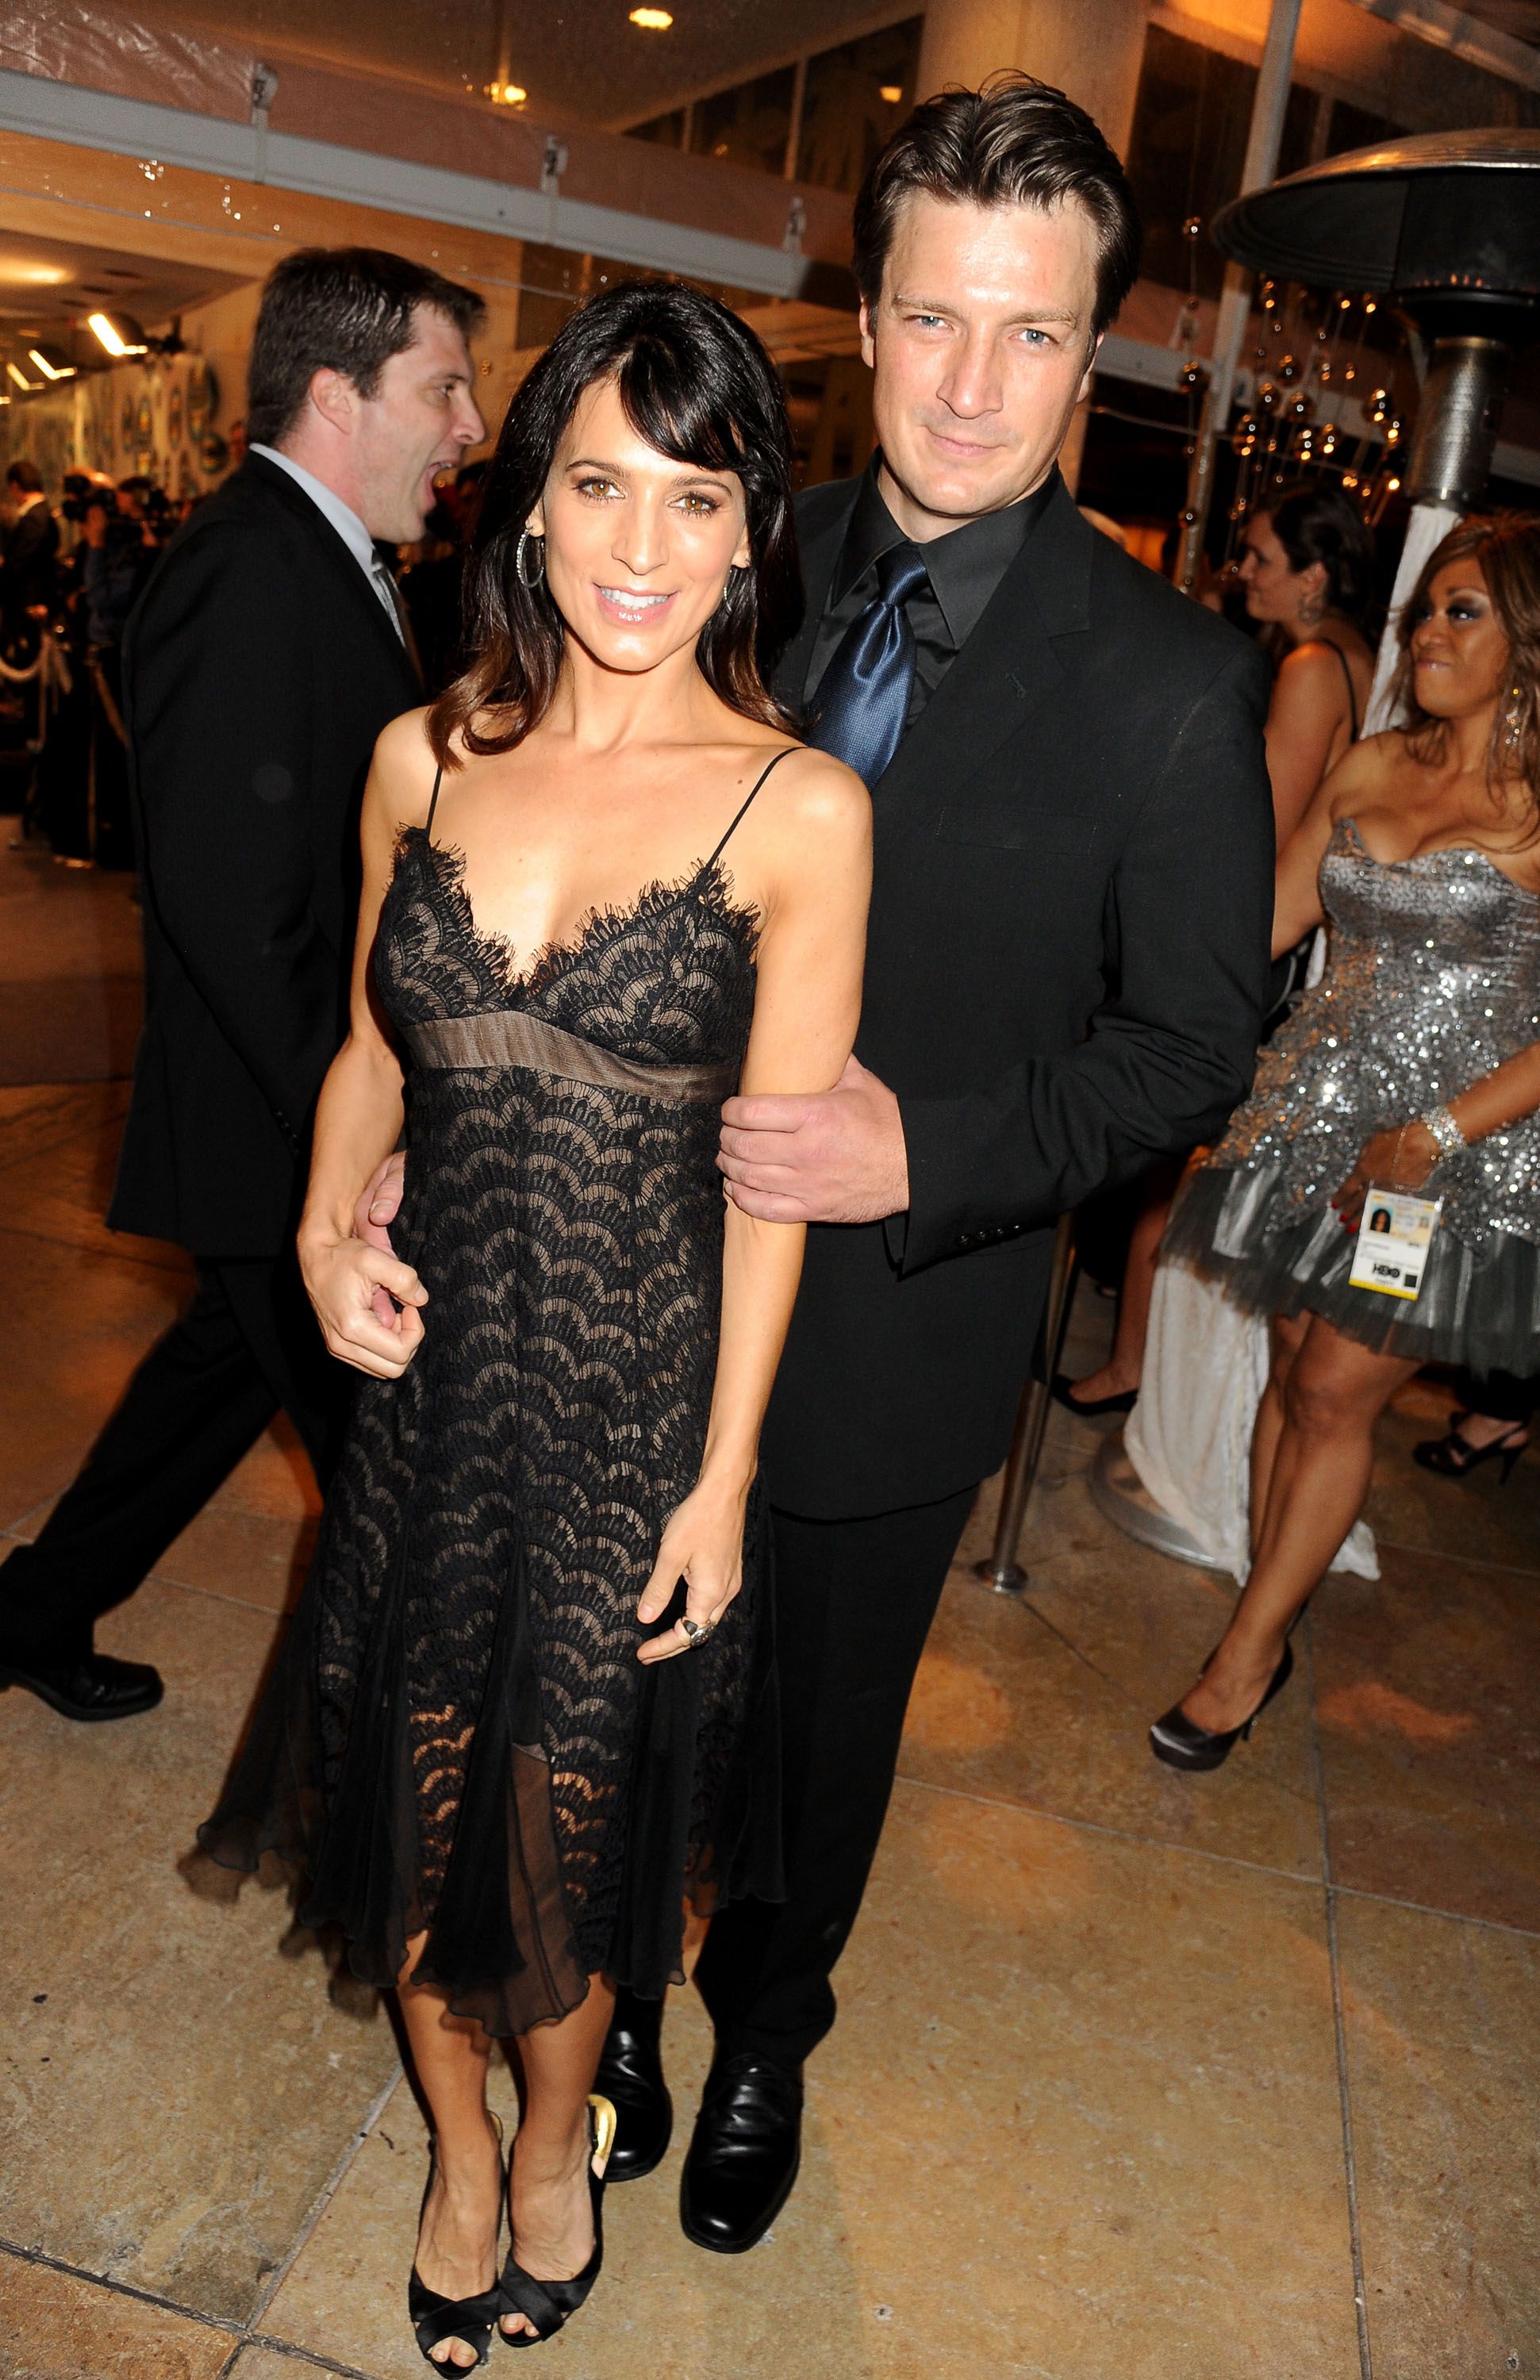 Perrey Reeves and Nathan Fillion at HBO's Official After Party for the 69th Annual Golden Globe Awards held at the Beverly Hilton Hotel on January 15, 2012 in Beverly Hills, California.  |  Source: Getty Images